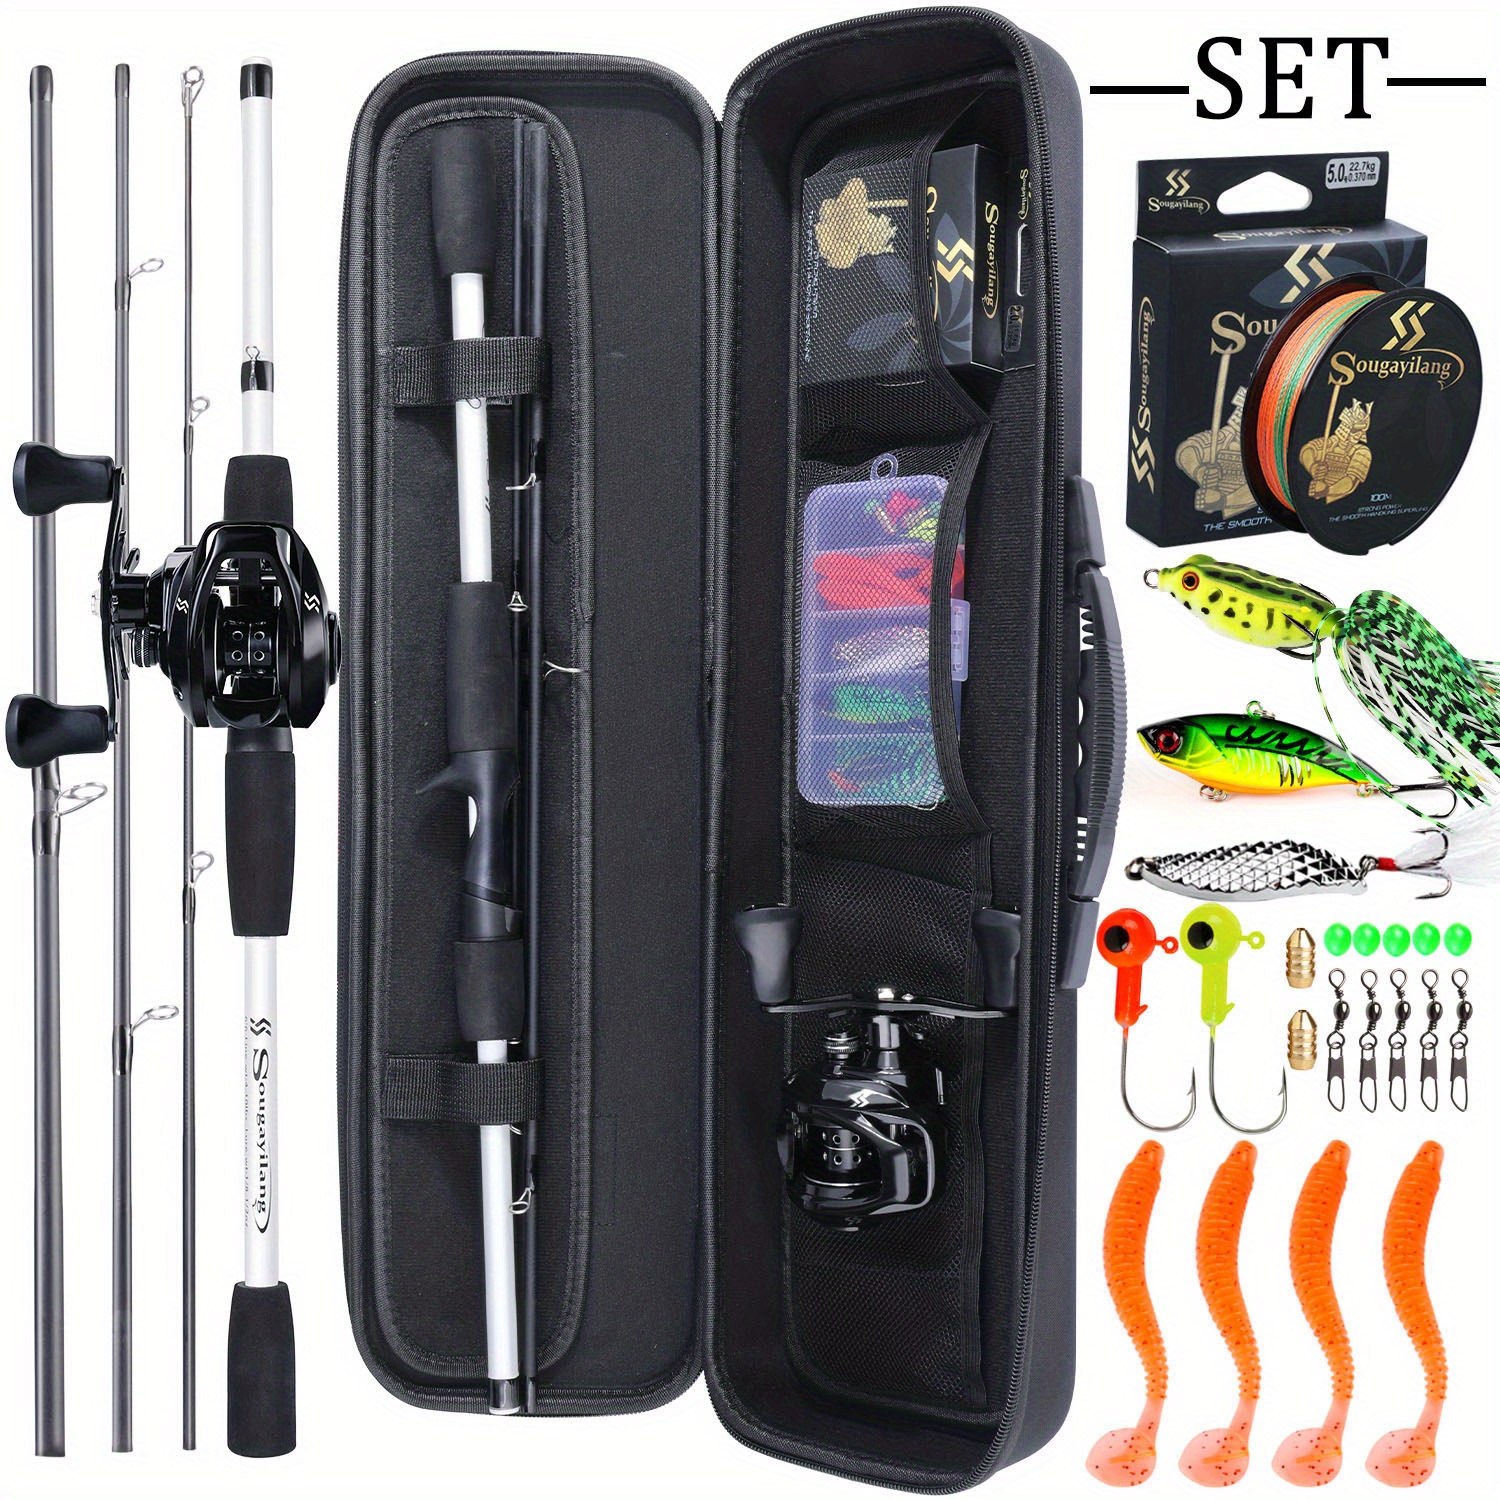 Sougayilang Portable Travel Fishing Combo 1.8-2.4m Casting Fishing Rod and  12+1BB Reel Combo Fishing Line Lures Bag Accessories